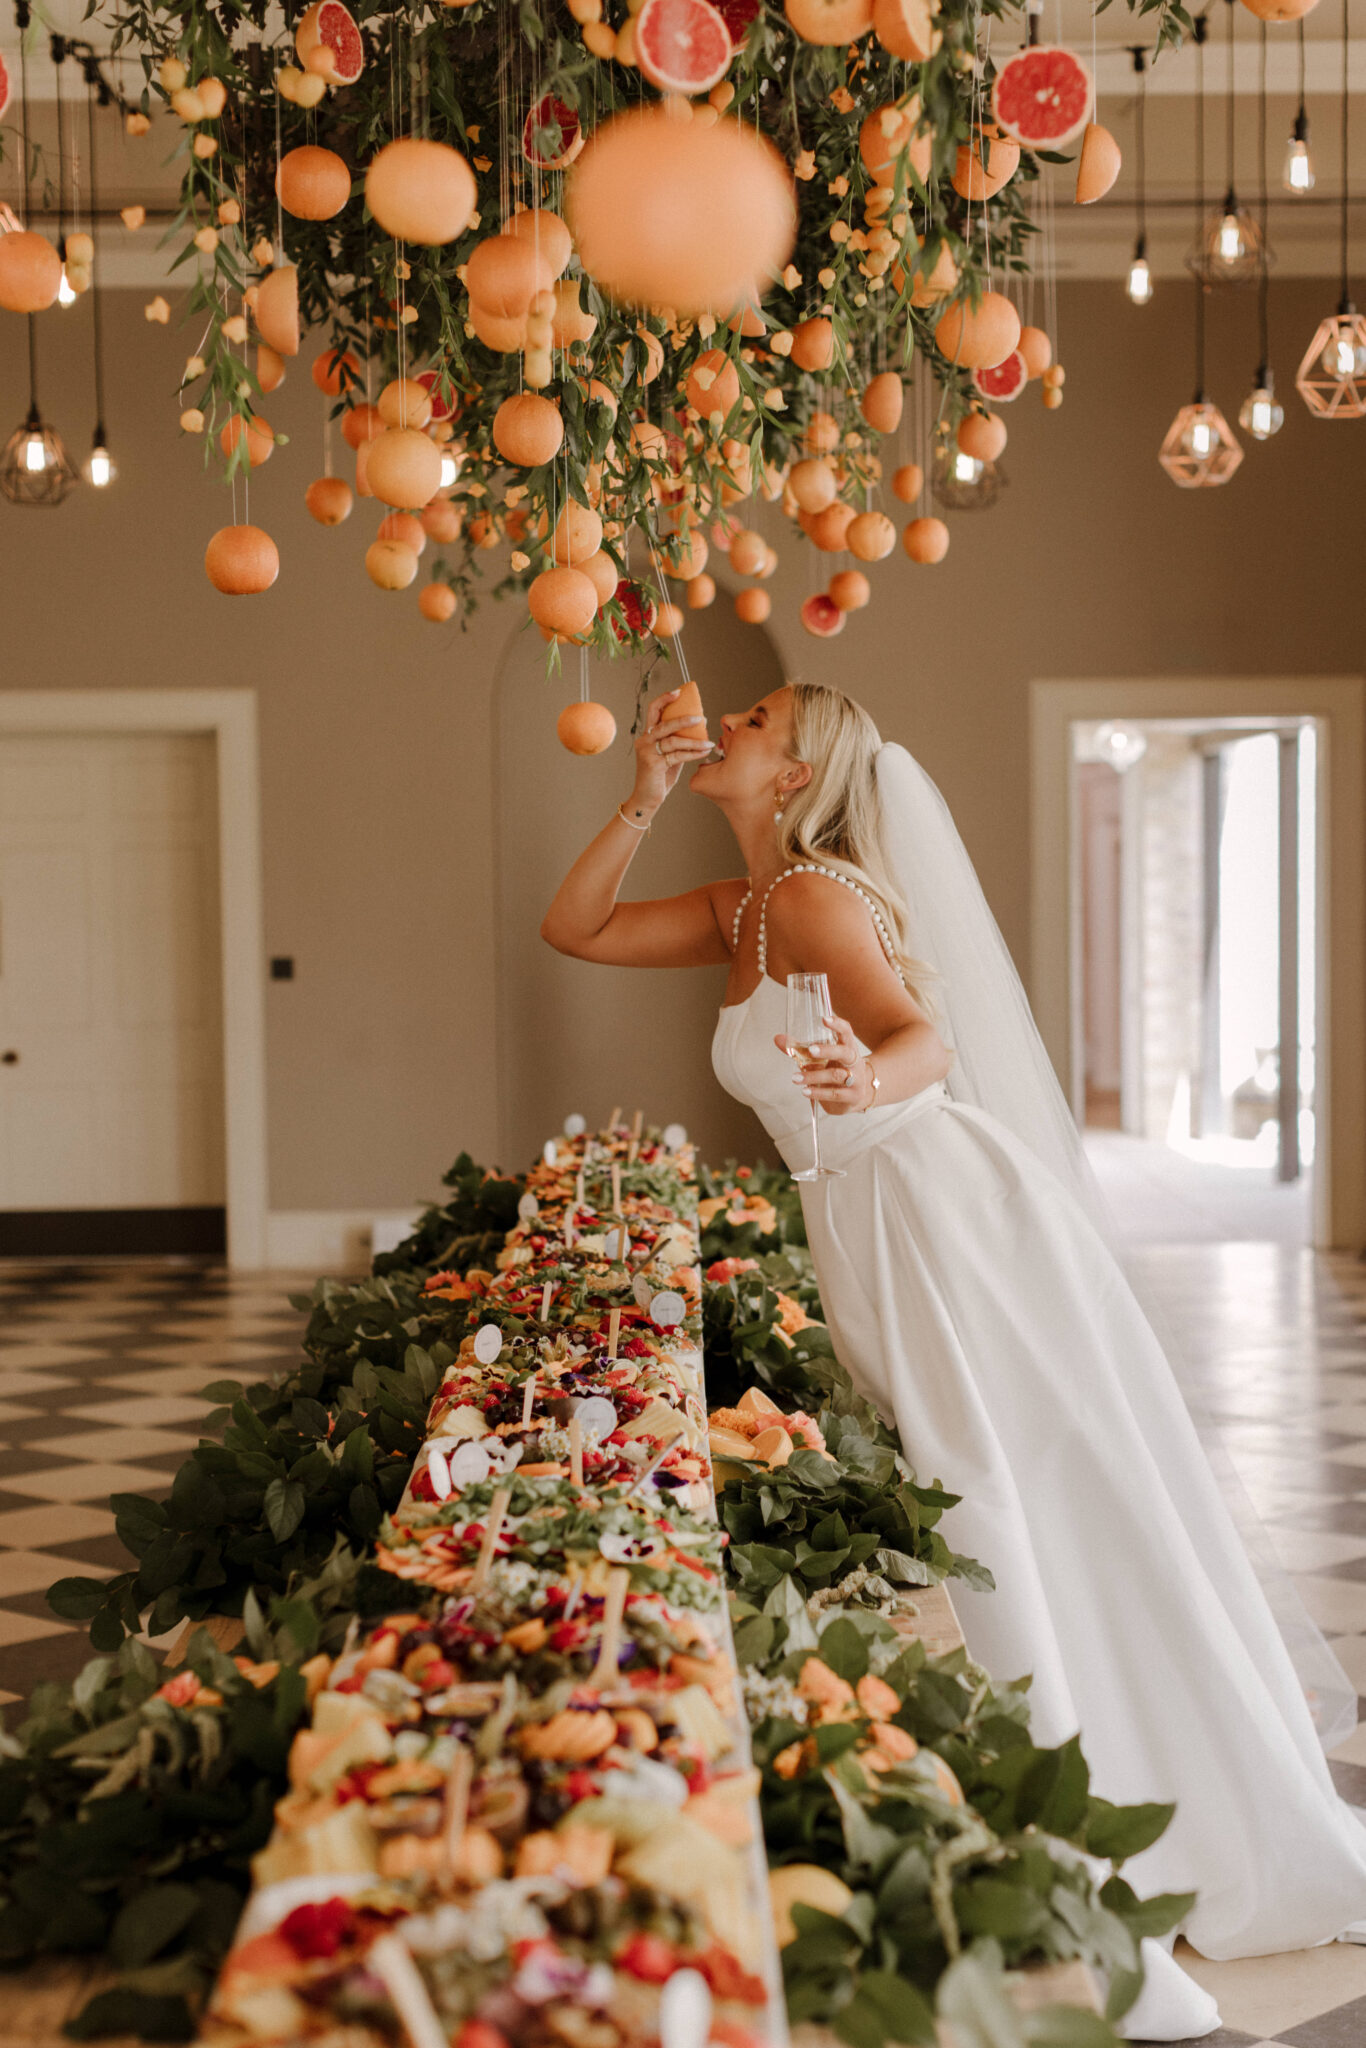 Bride at grazing table with canopy of oranges